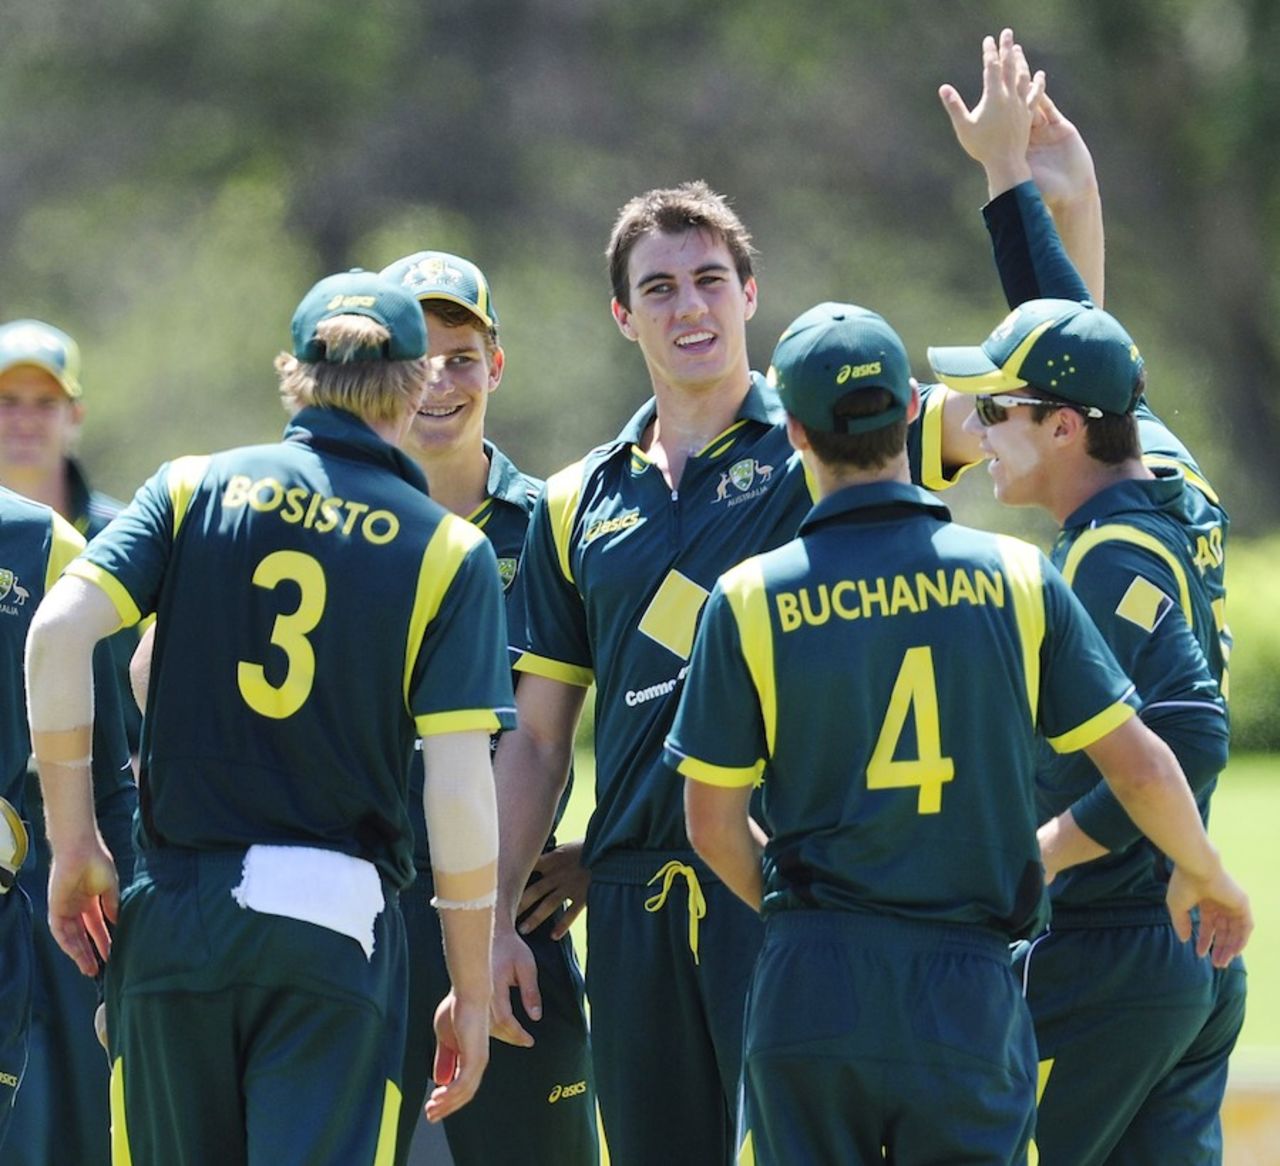 Pat Cummins turned out for Australia Under-19, Townsville, April 9, 2012